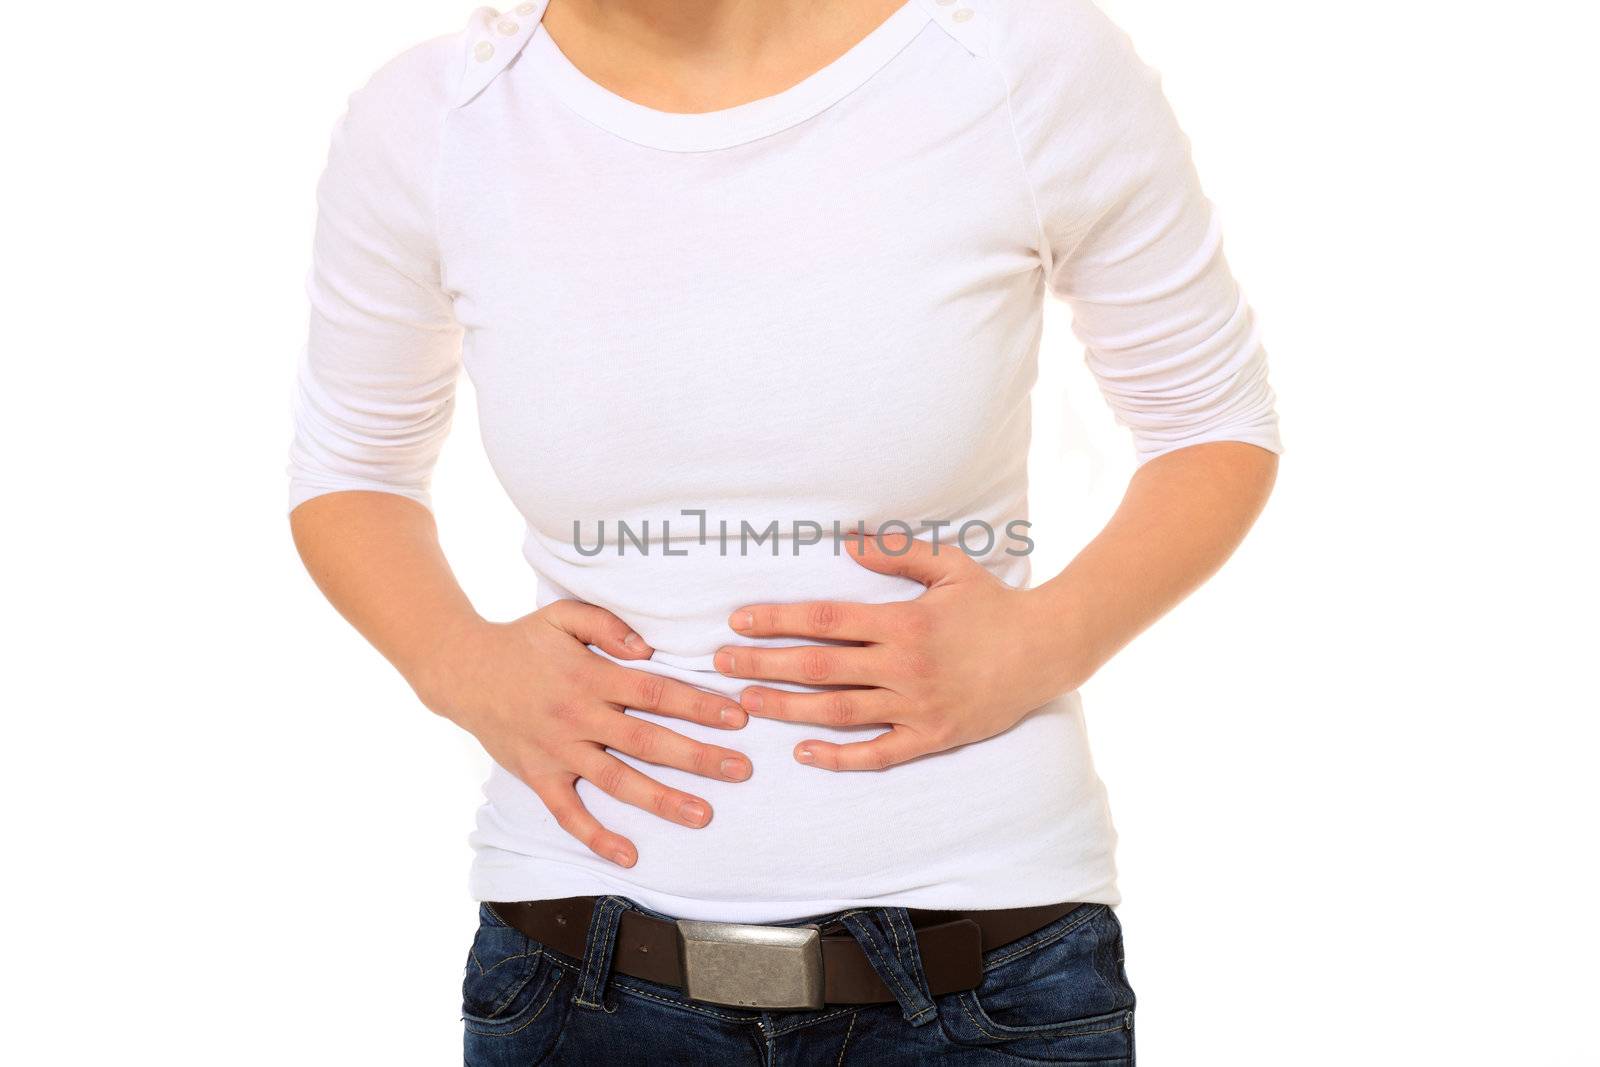 Attractive blonde woman suffering from stomachache. All on white background.